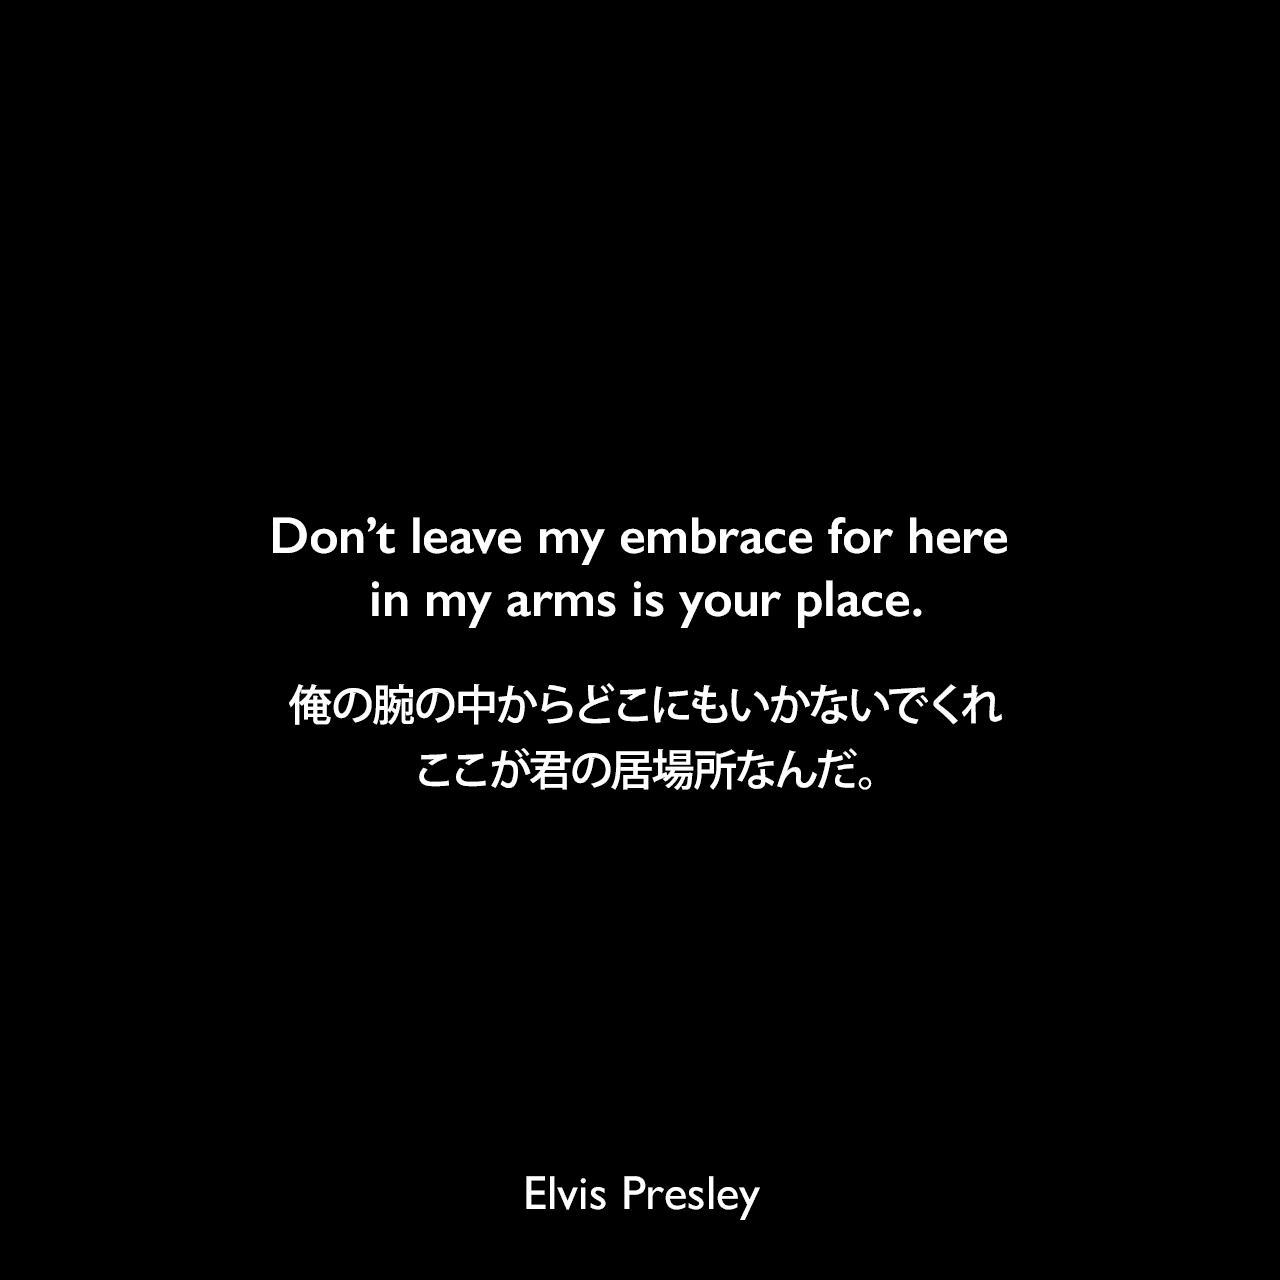 Don’t leave my embrace for here in my arms is your place.俺の腕の中からどこにもいかないでくれ、ここが君の居場所なんだ。Elvis Presley